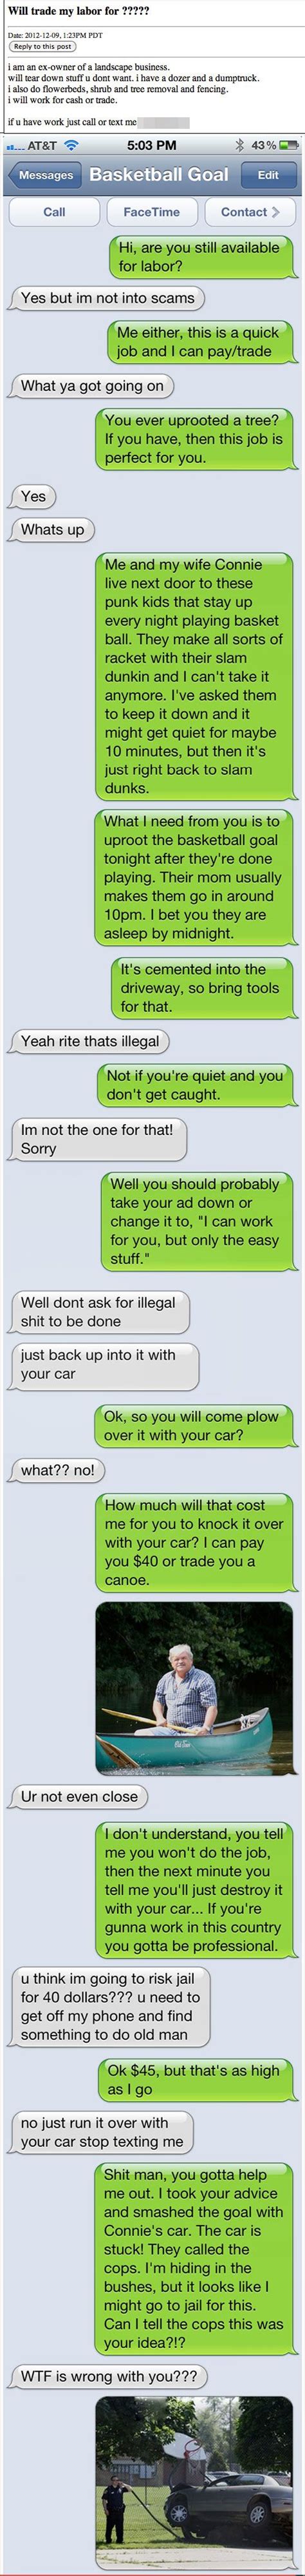 the 10 best texting pranks ever funny text messages funny text fails